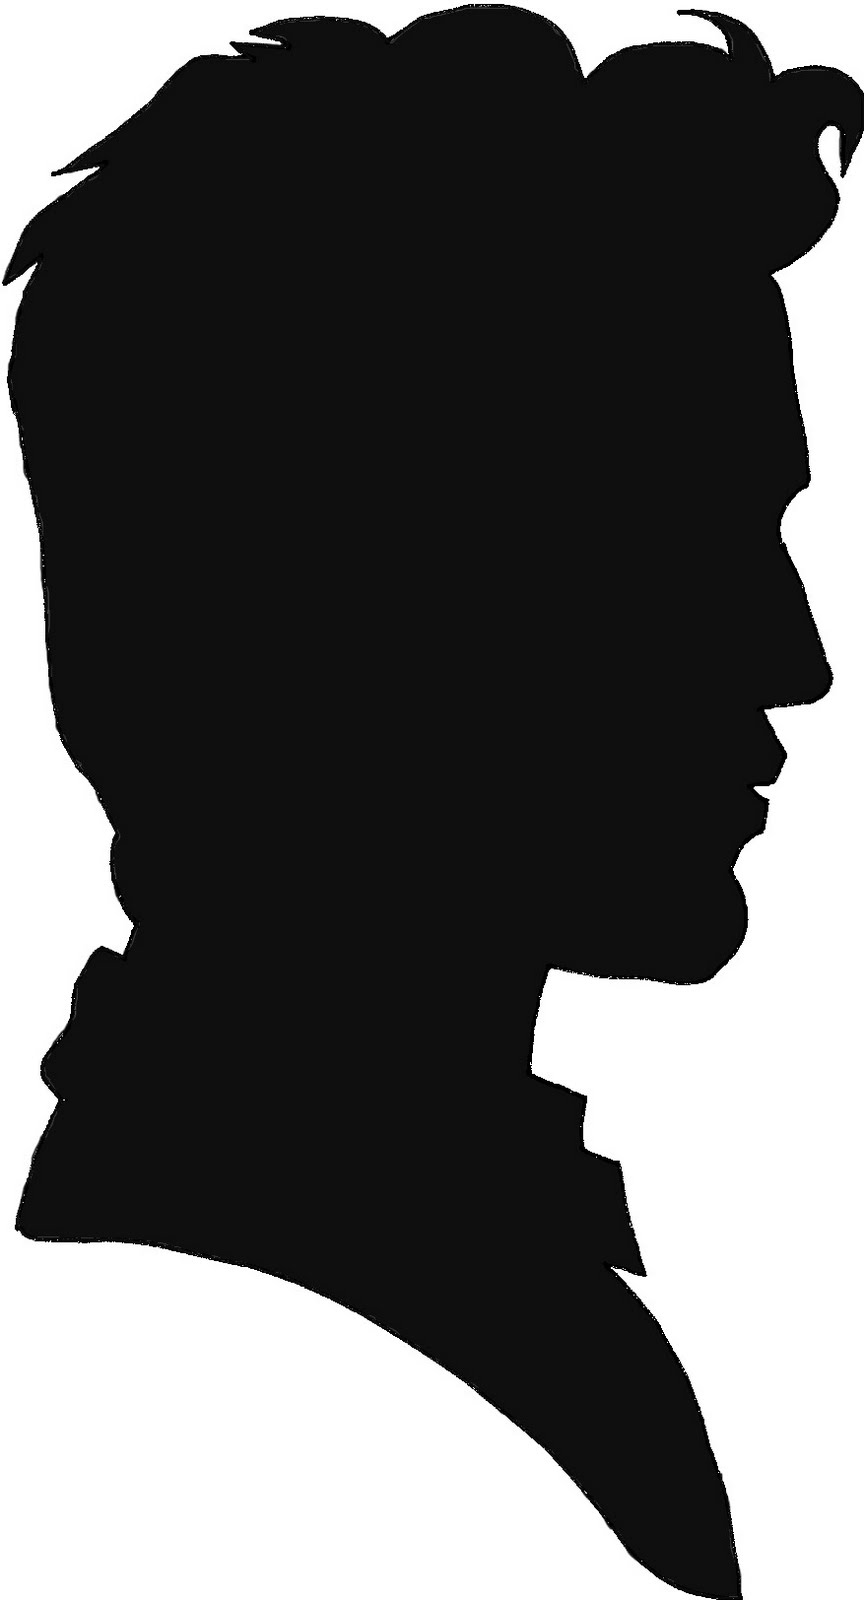 Pix For > Silhouette Man Face Side